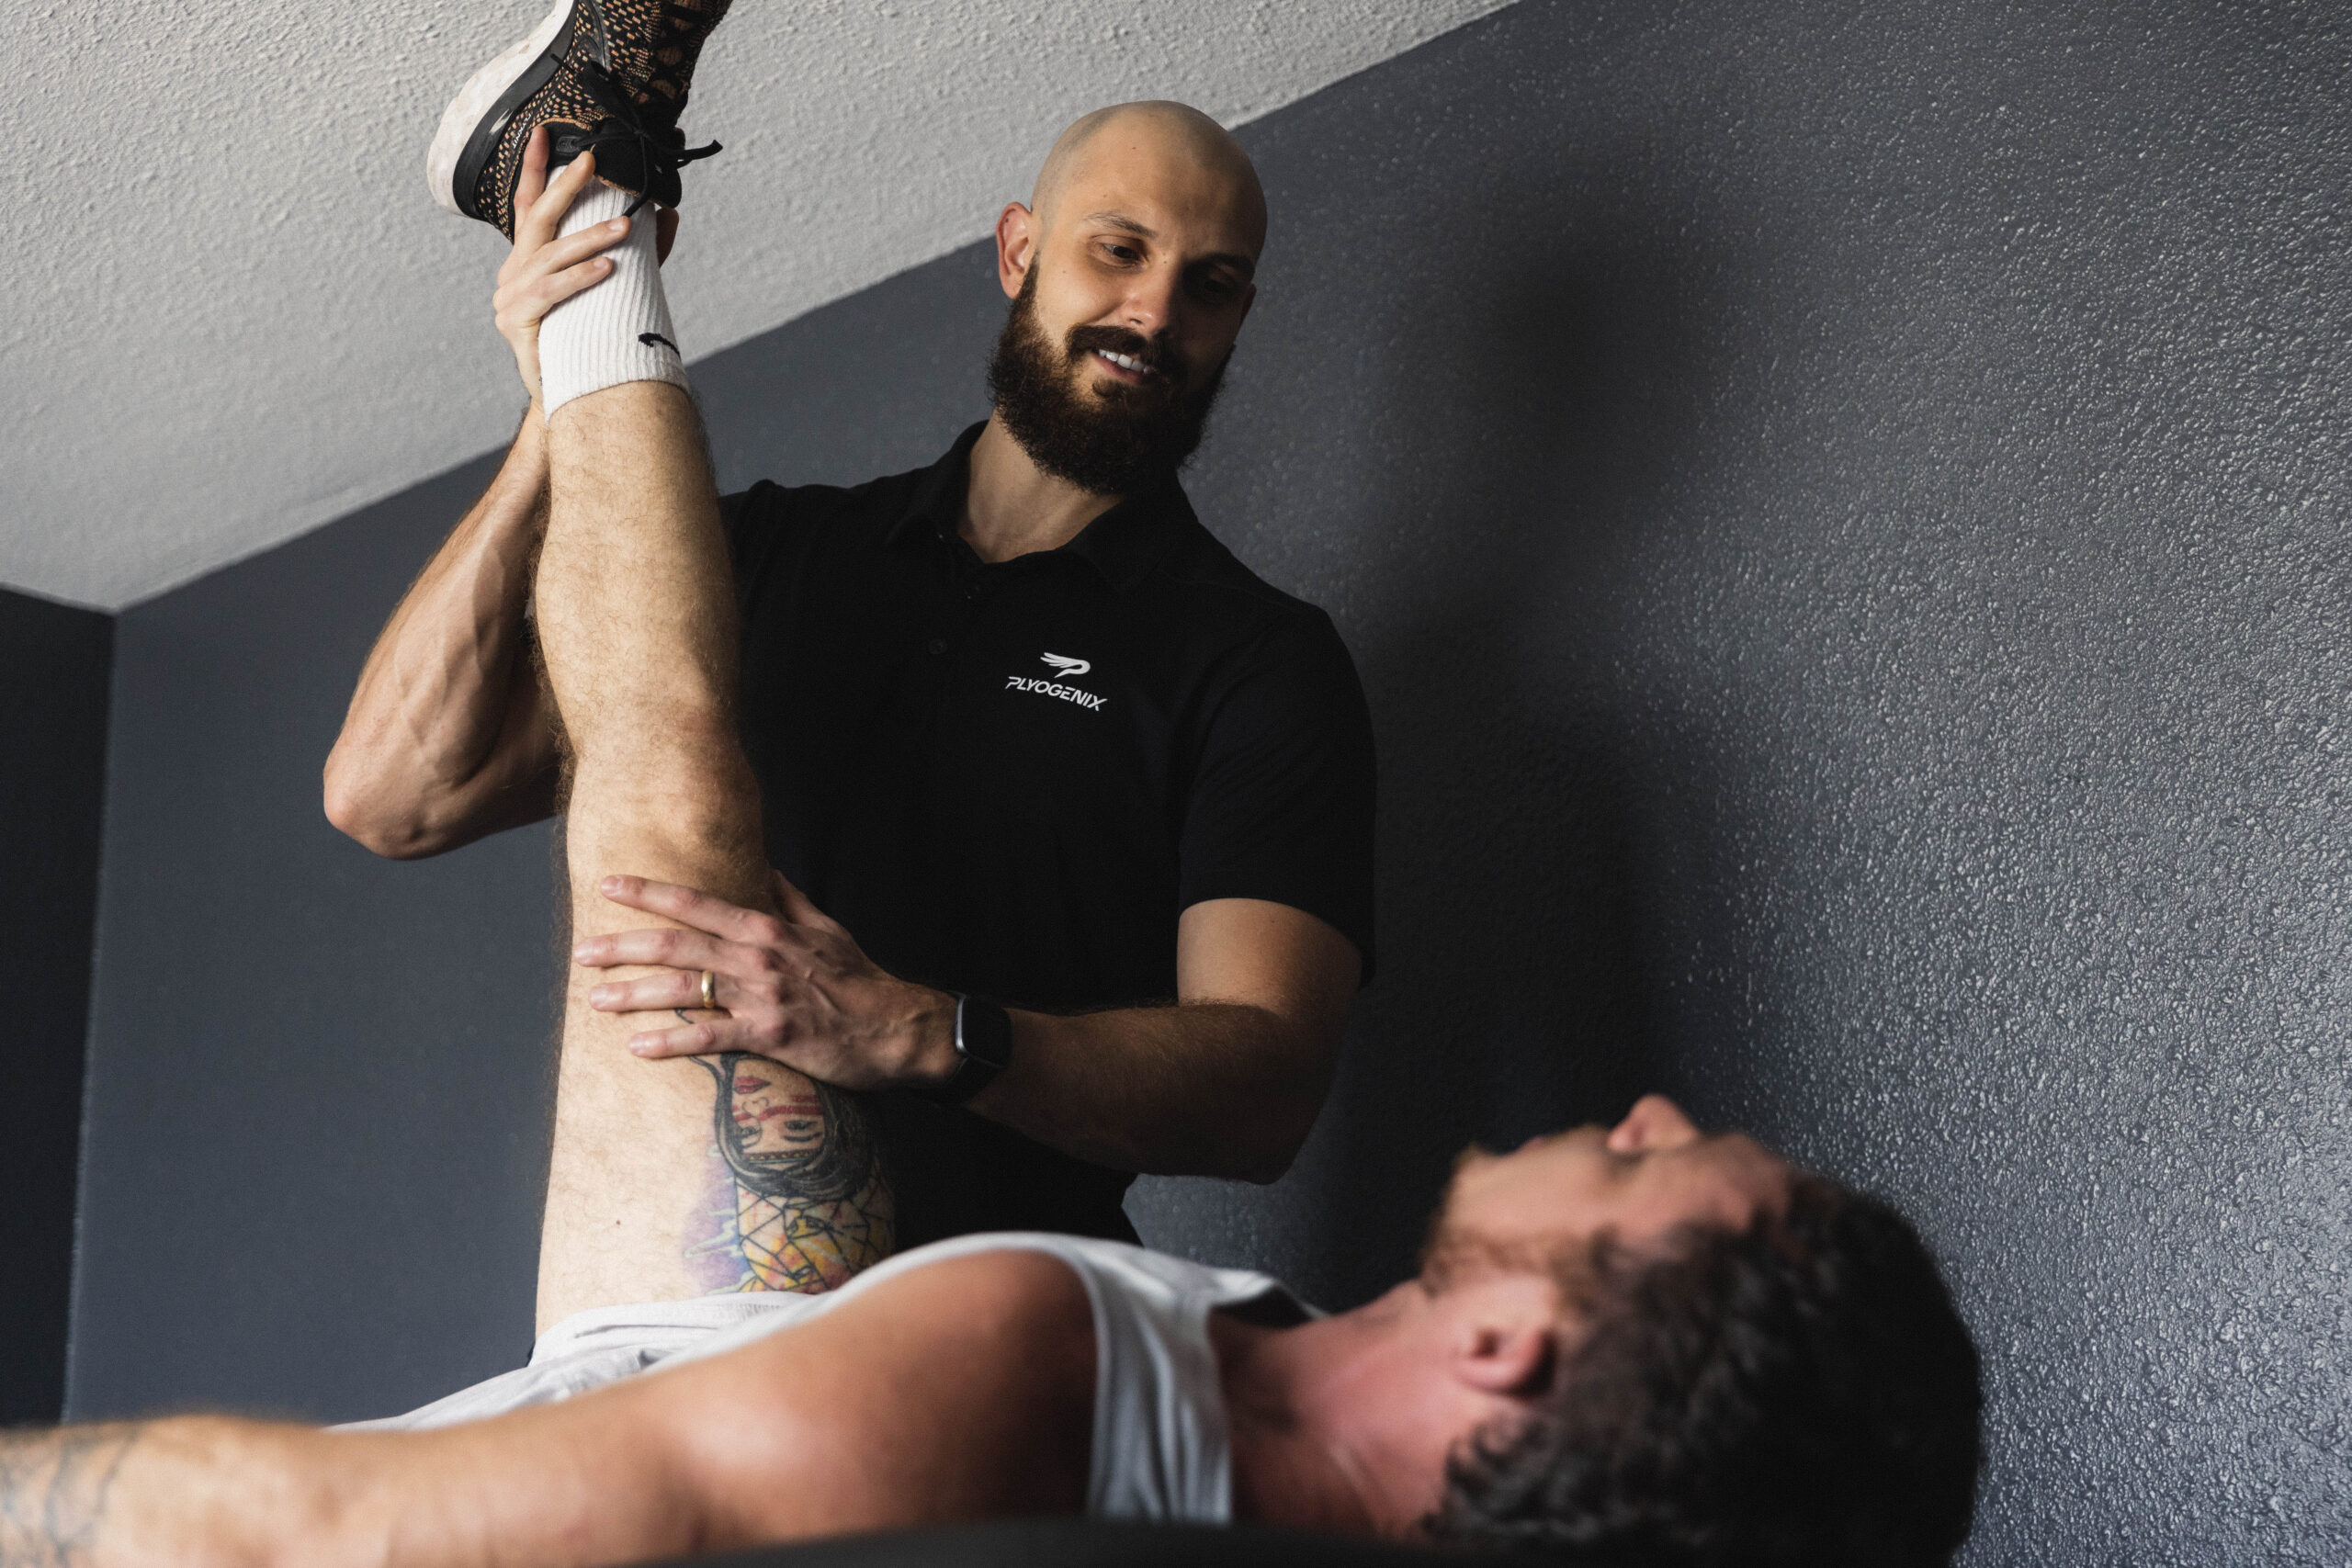 dr mitko working with stretching a clients leg during physical therapy